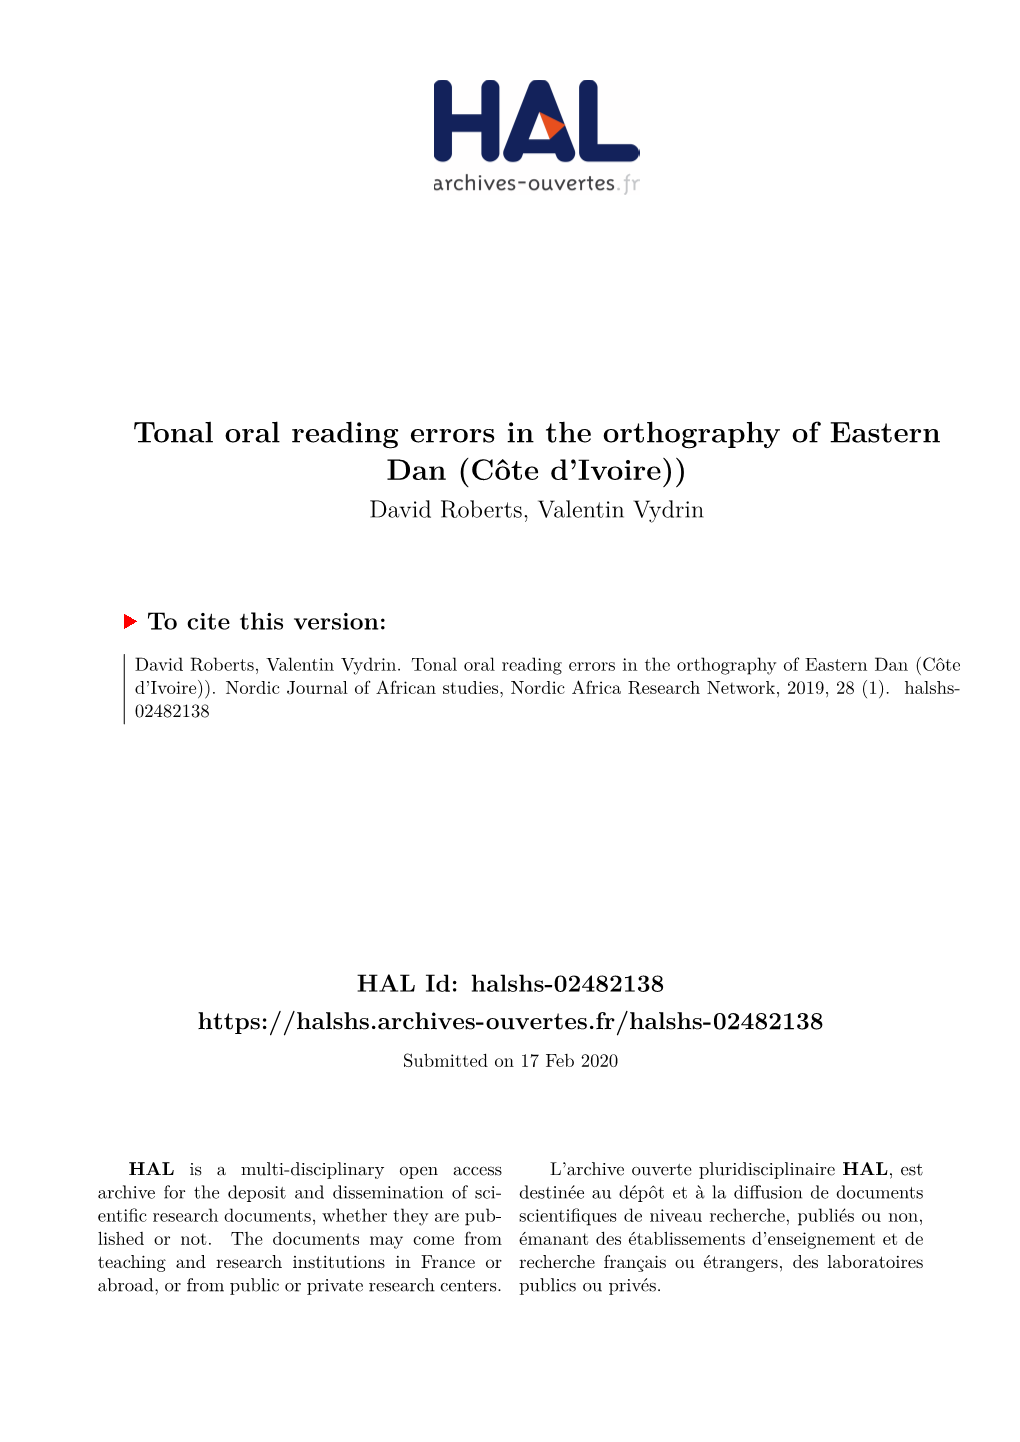 Tonal Oral Reading Errors in the Orthography of Eastern Dan (Côte D’Ivoire)) David Roberts, Valentin Vydrin